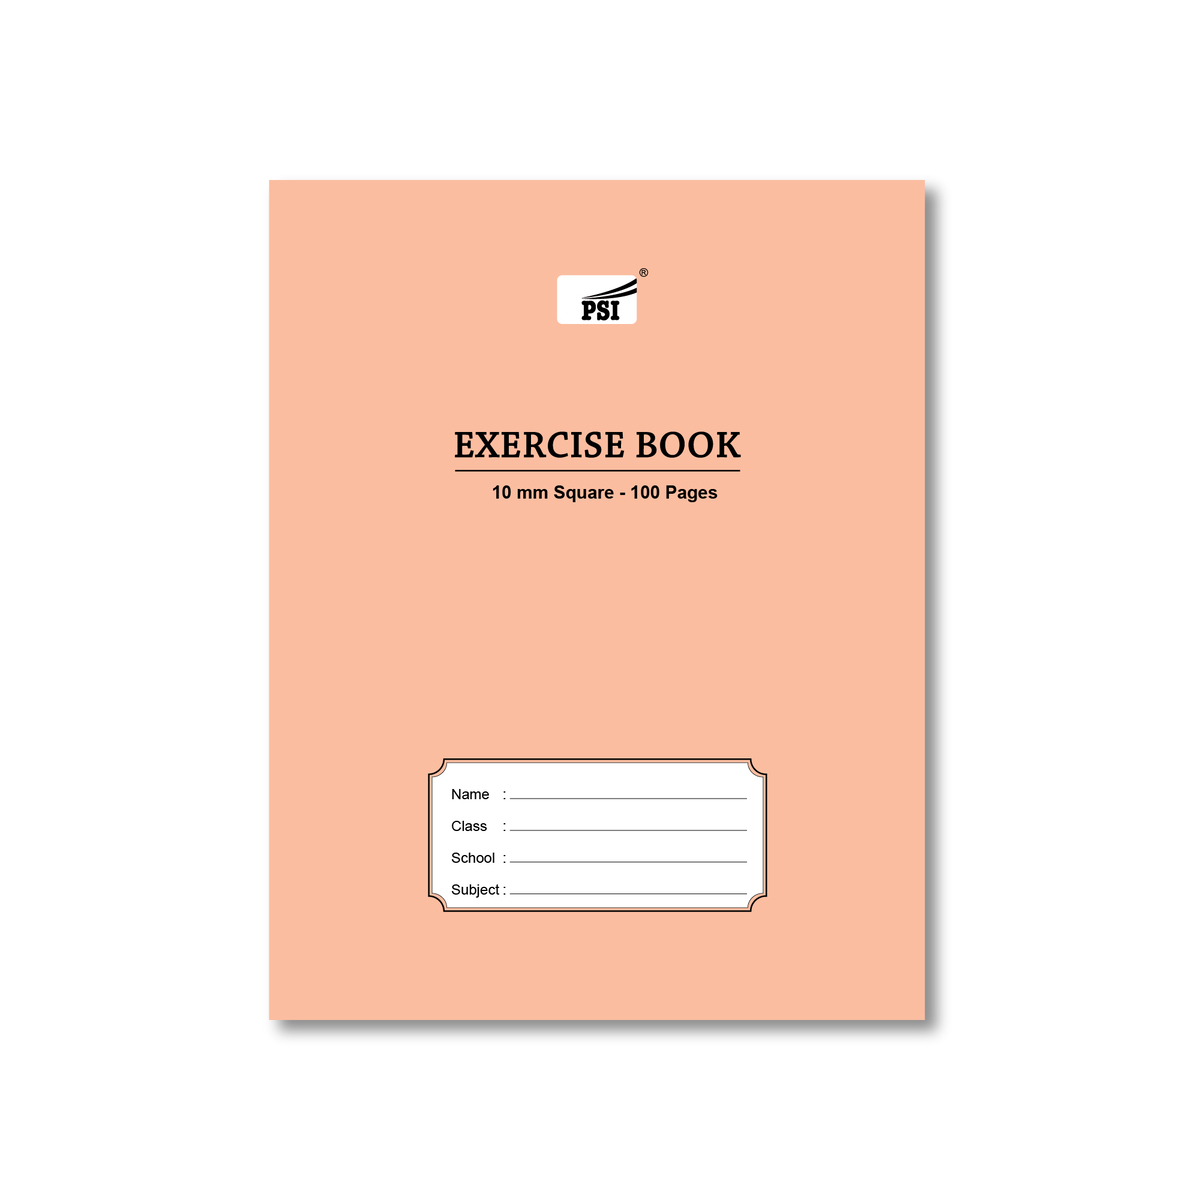 PSI Exercise Book 10mm Square 100 Pages 4LM100